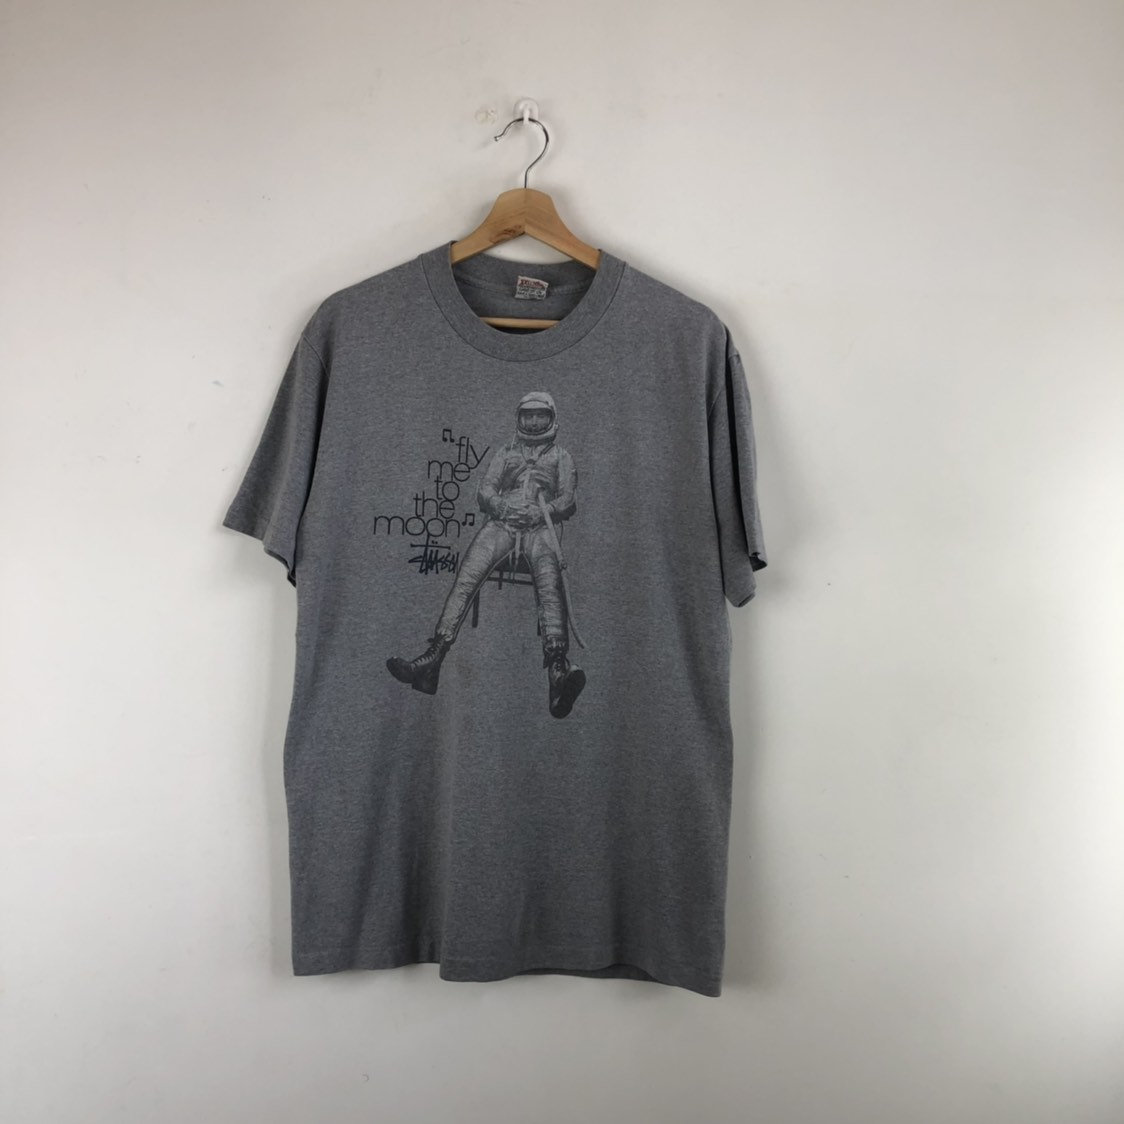 STUSSY 】宇宙飛行士Fly me to the moon Tシャツ M camping.com